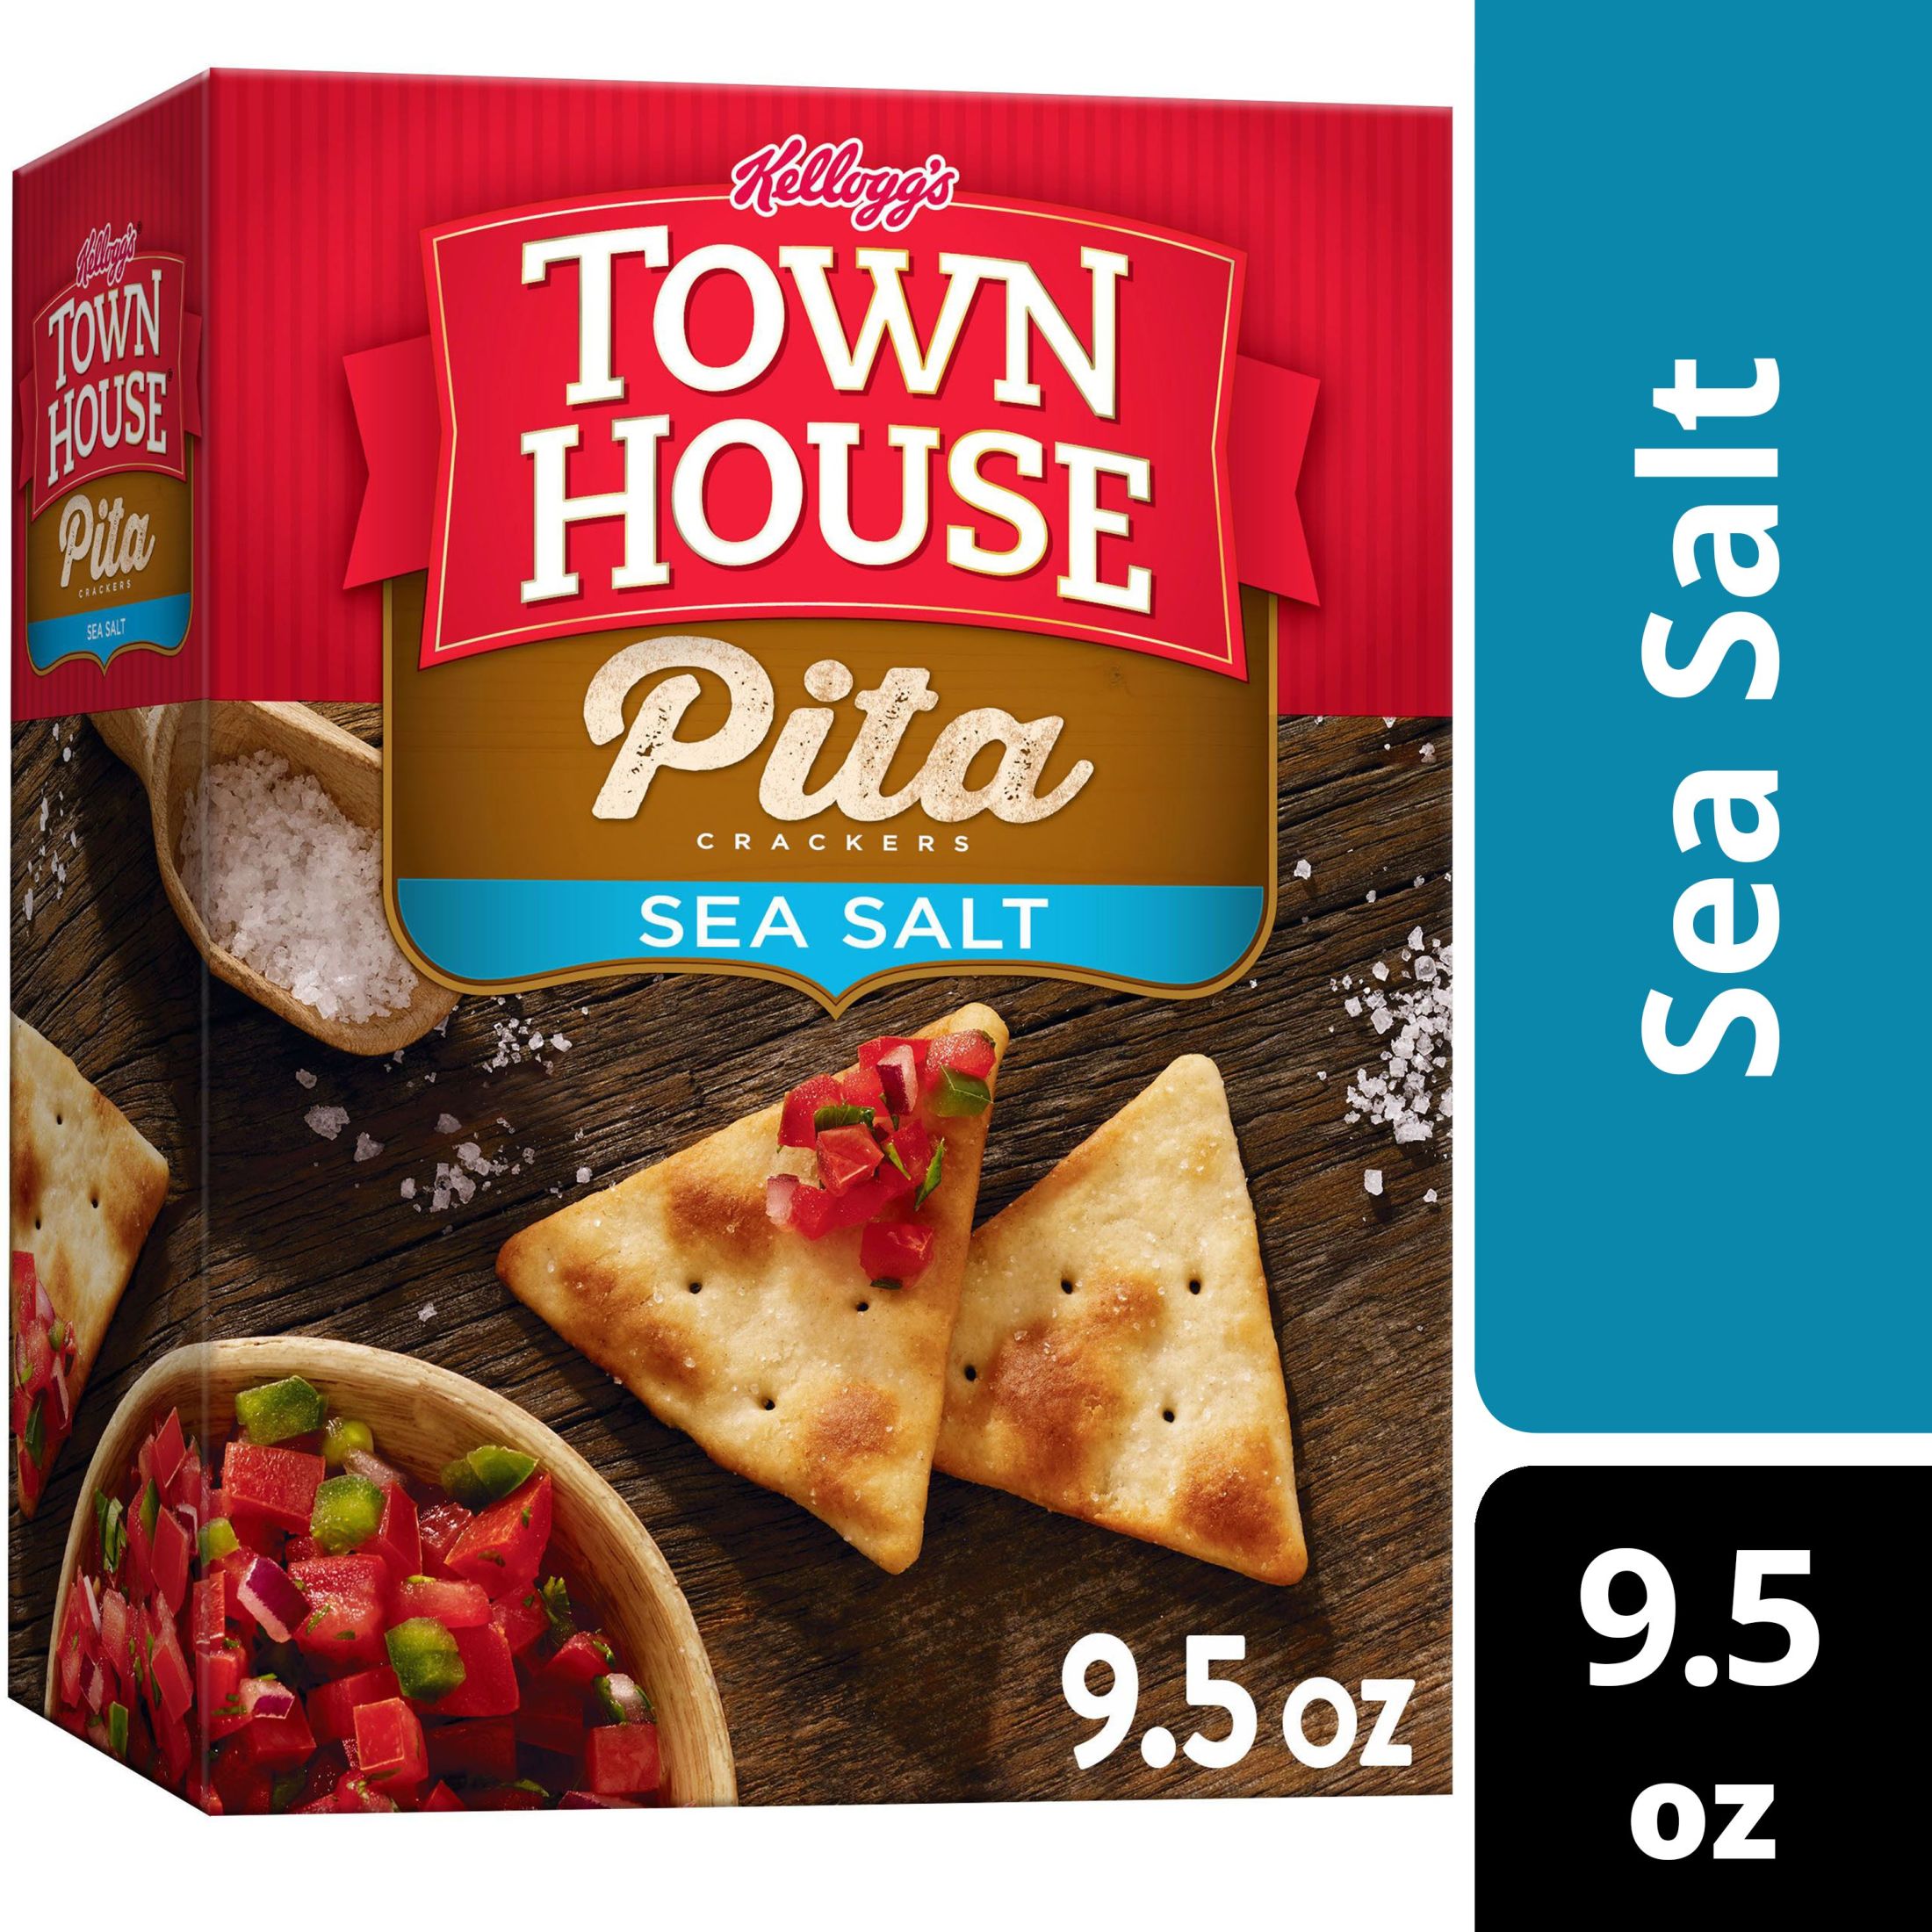 Town House Pita Sea Salt Oven Baked Crackers, 9.5 oz - image 1 of 10